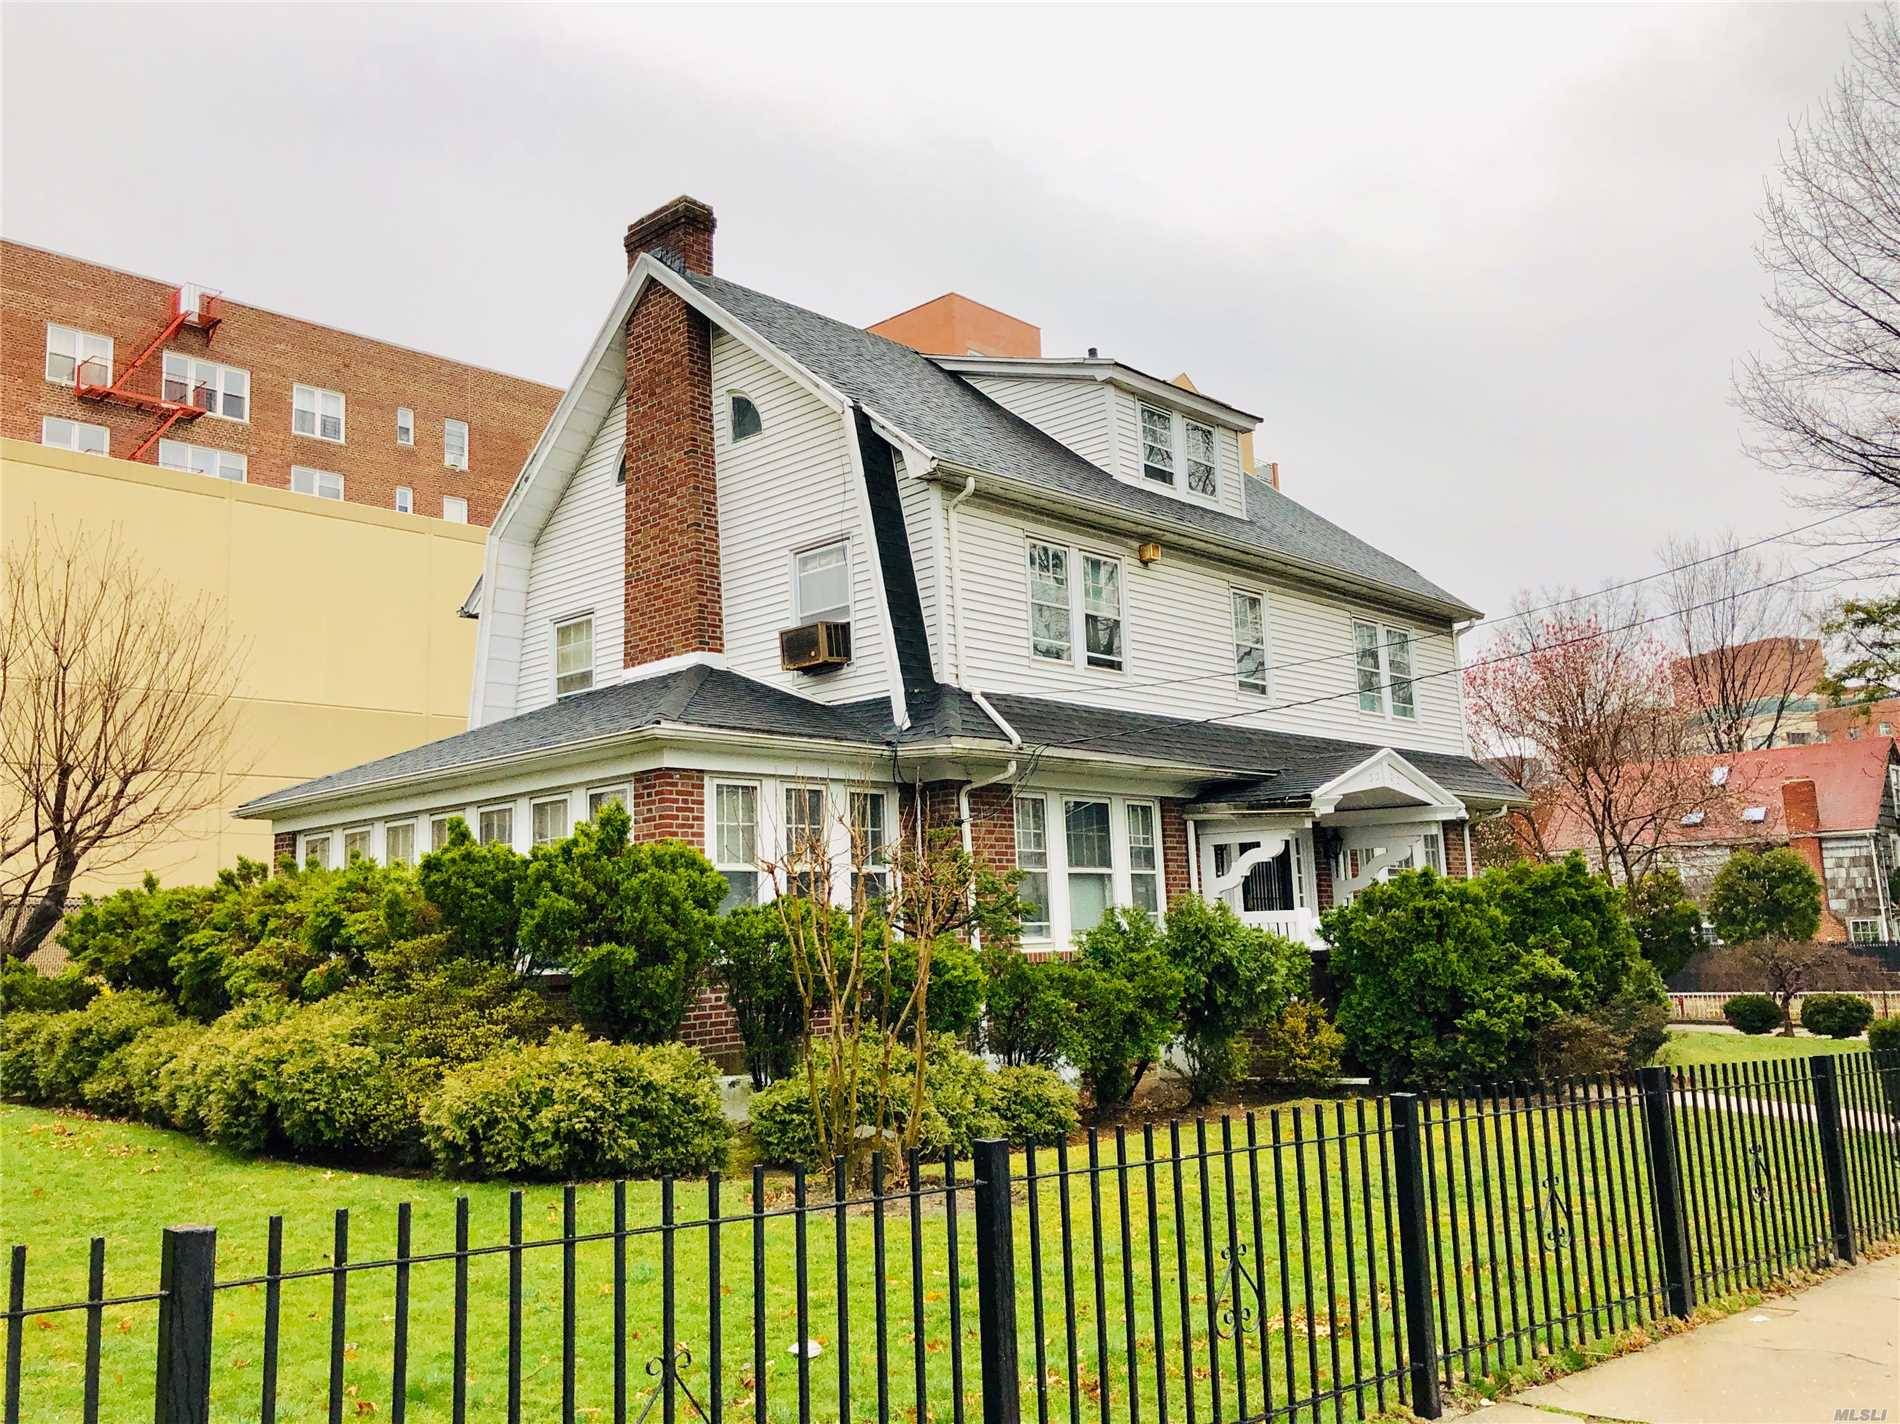 Large 5 Brs 5 Bth Traditional Colonial House in Large Lot size in Center of Flushing.